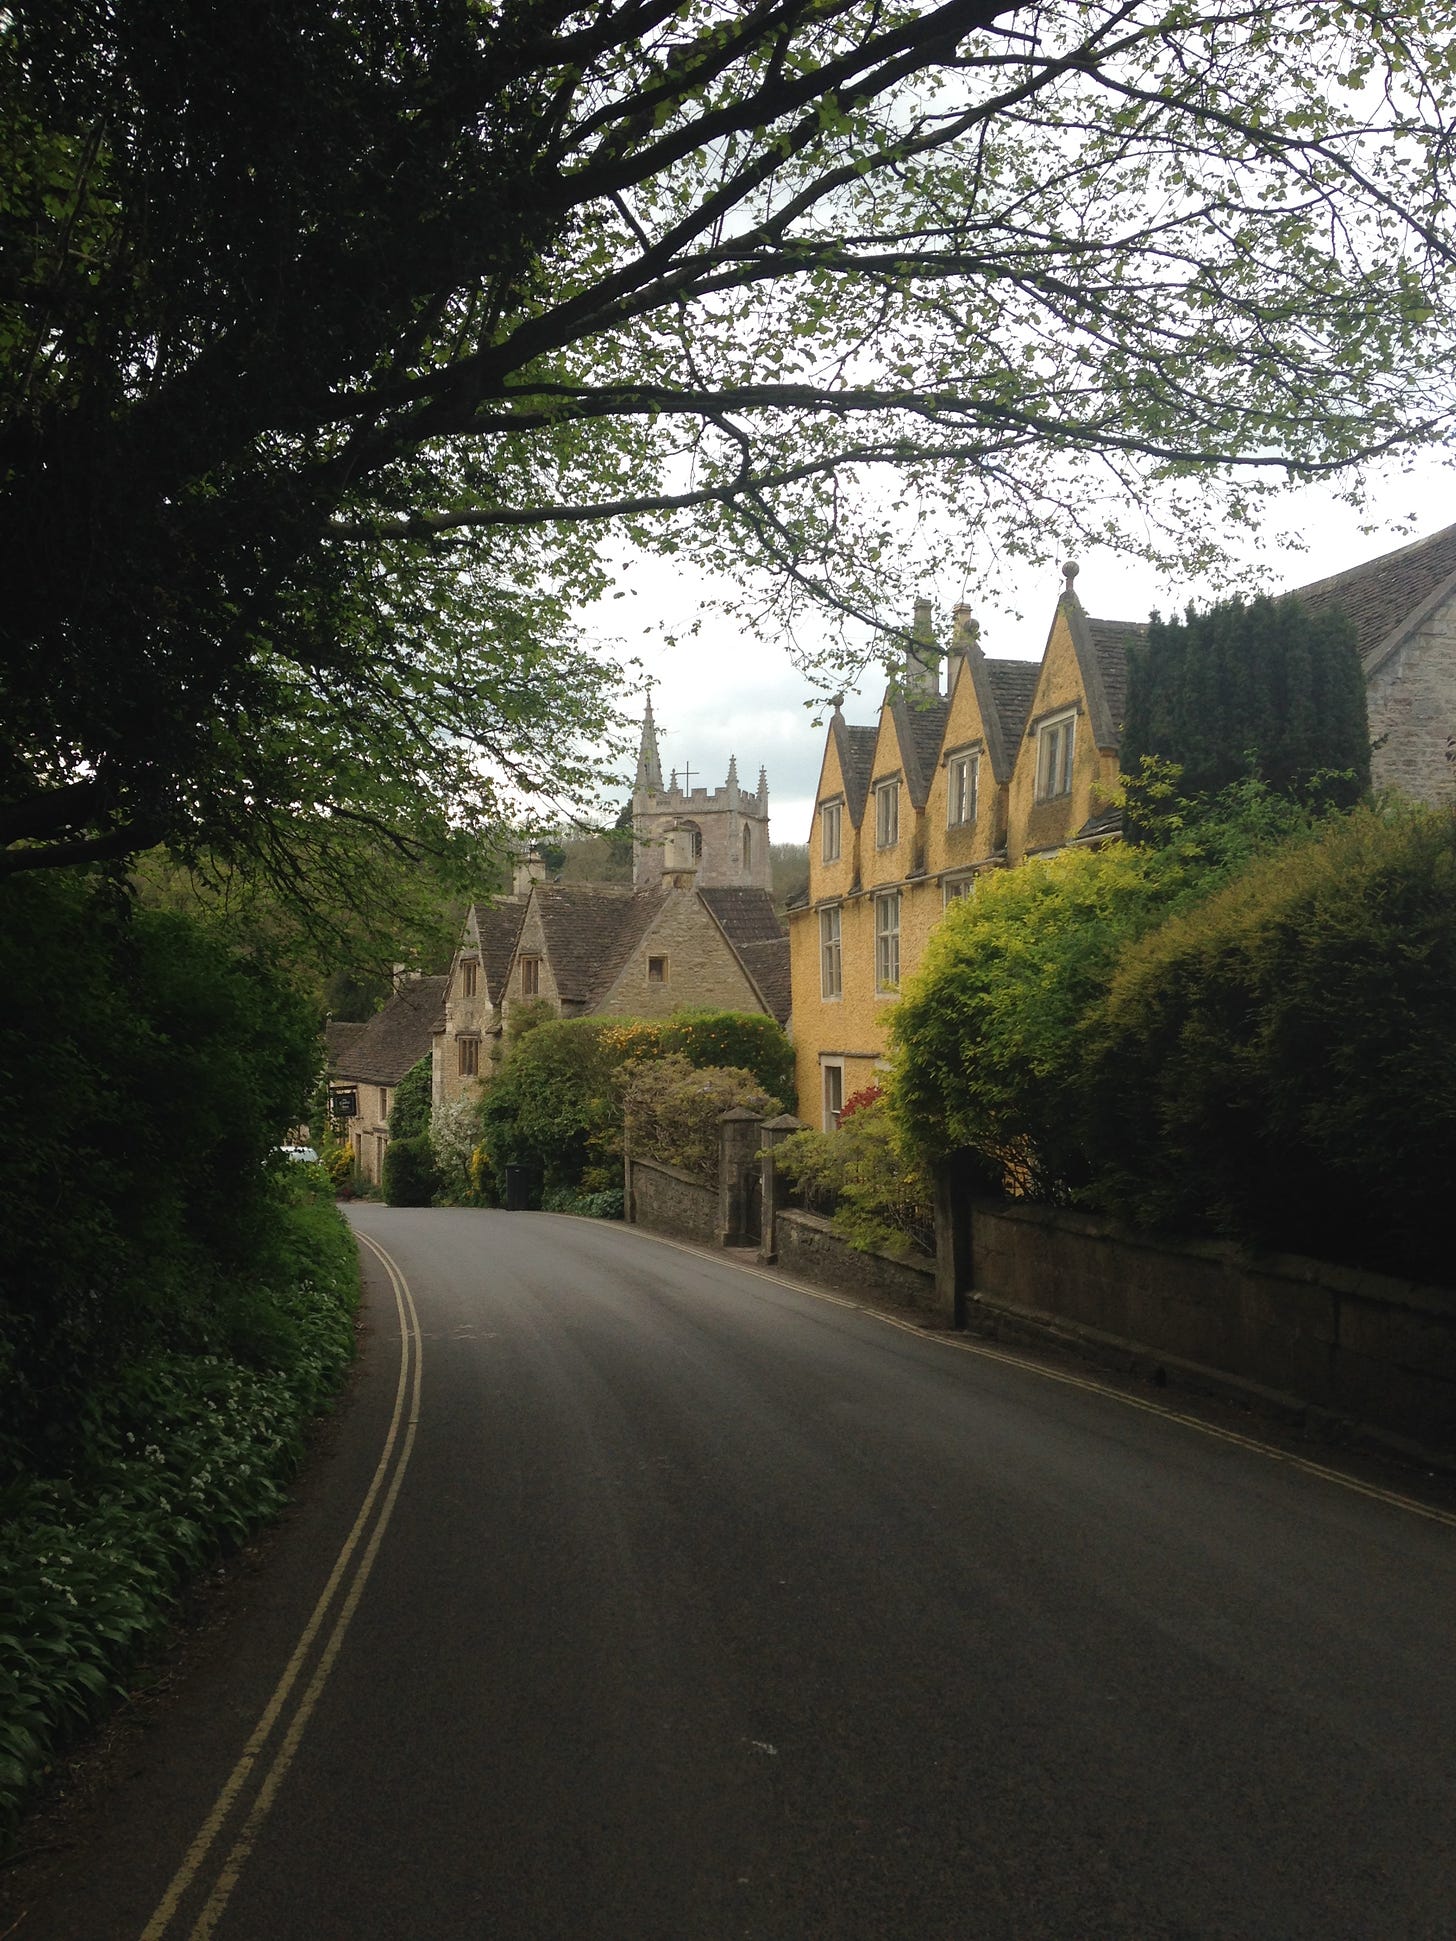 Castle Combe with it's very old buildings